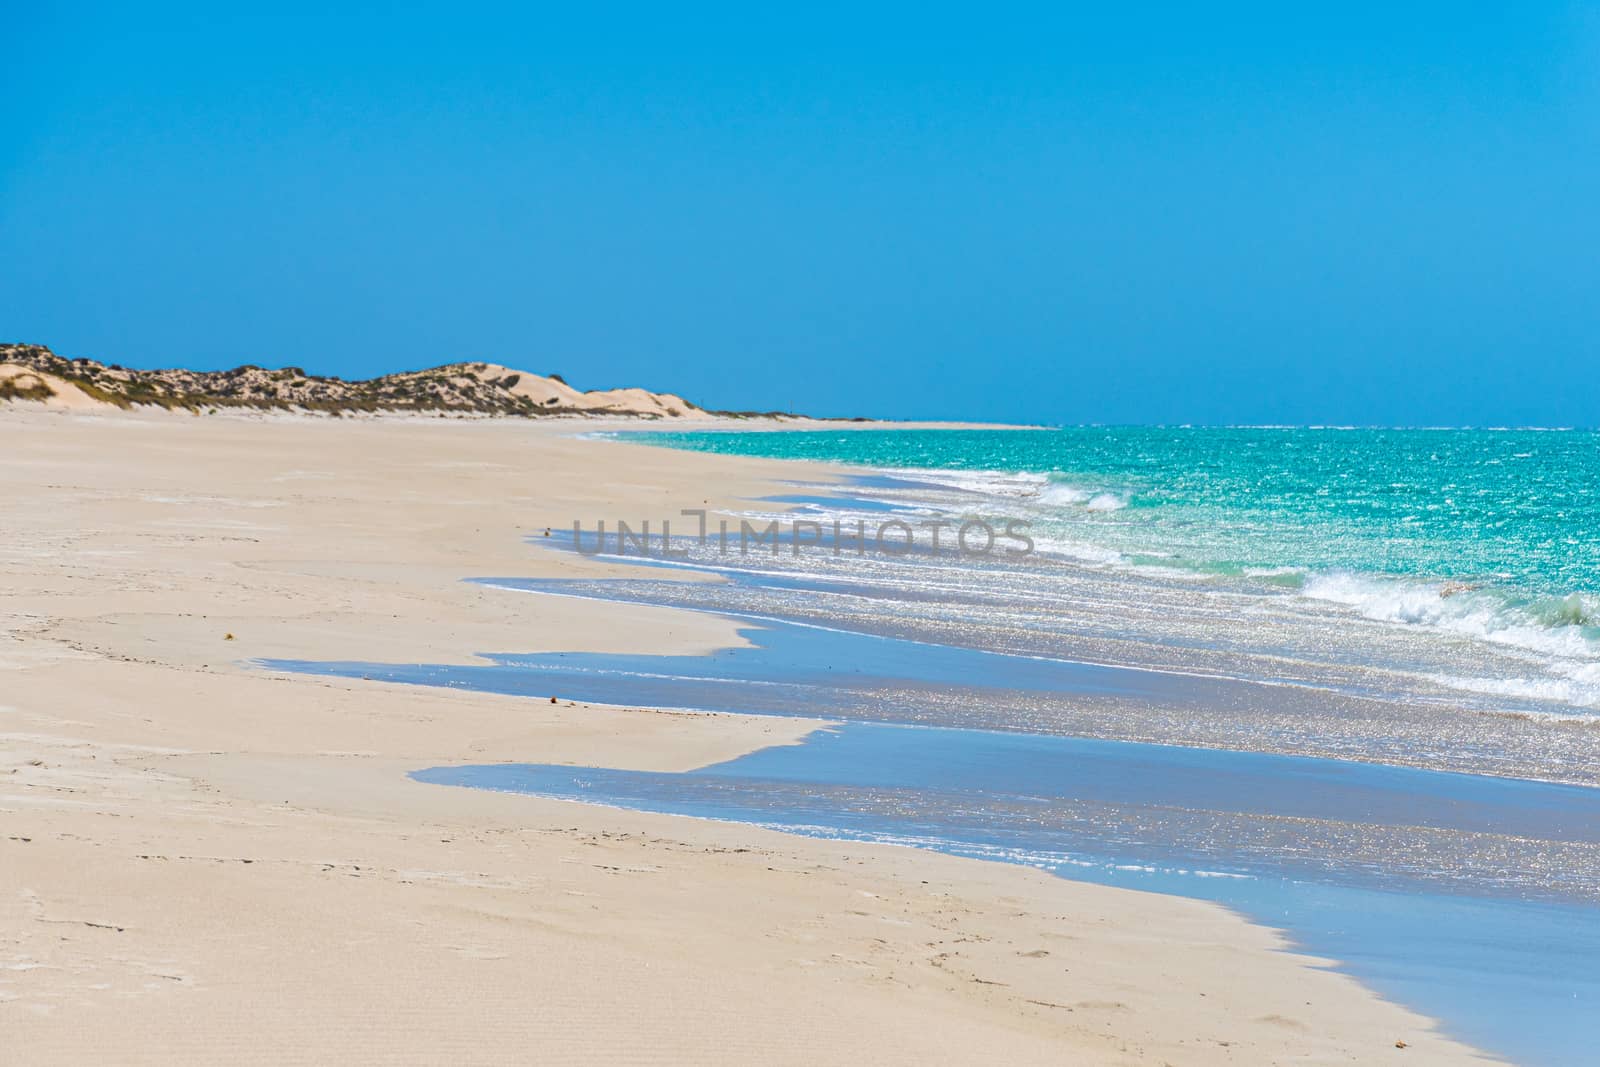 Long and empty beach of Coral Bay blue sky and turquoise water of Indian Ocean